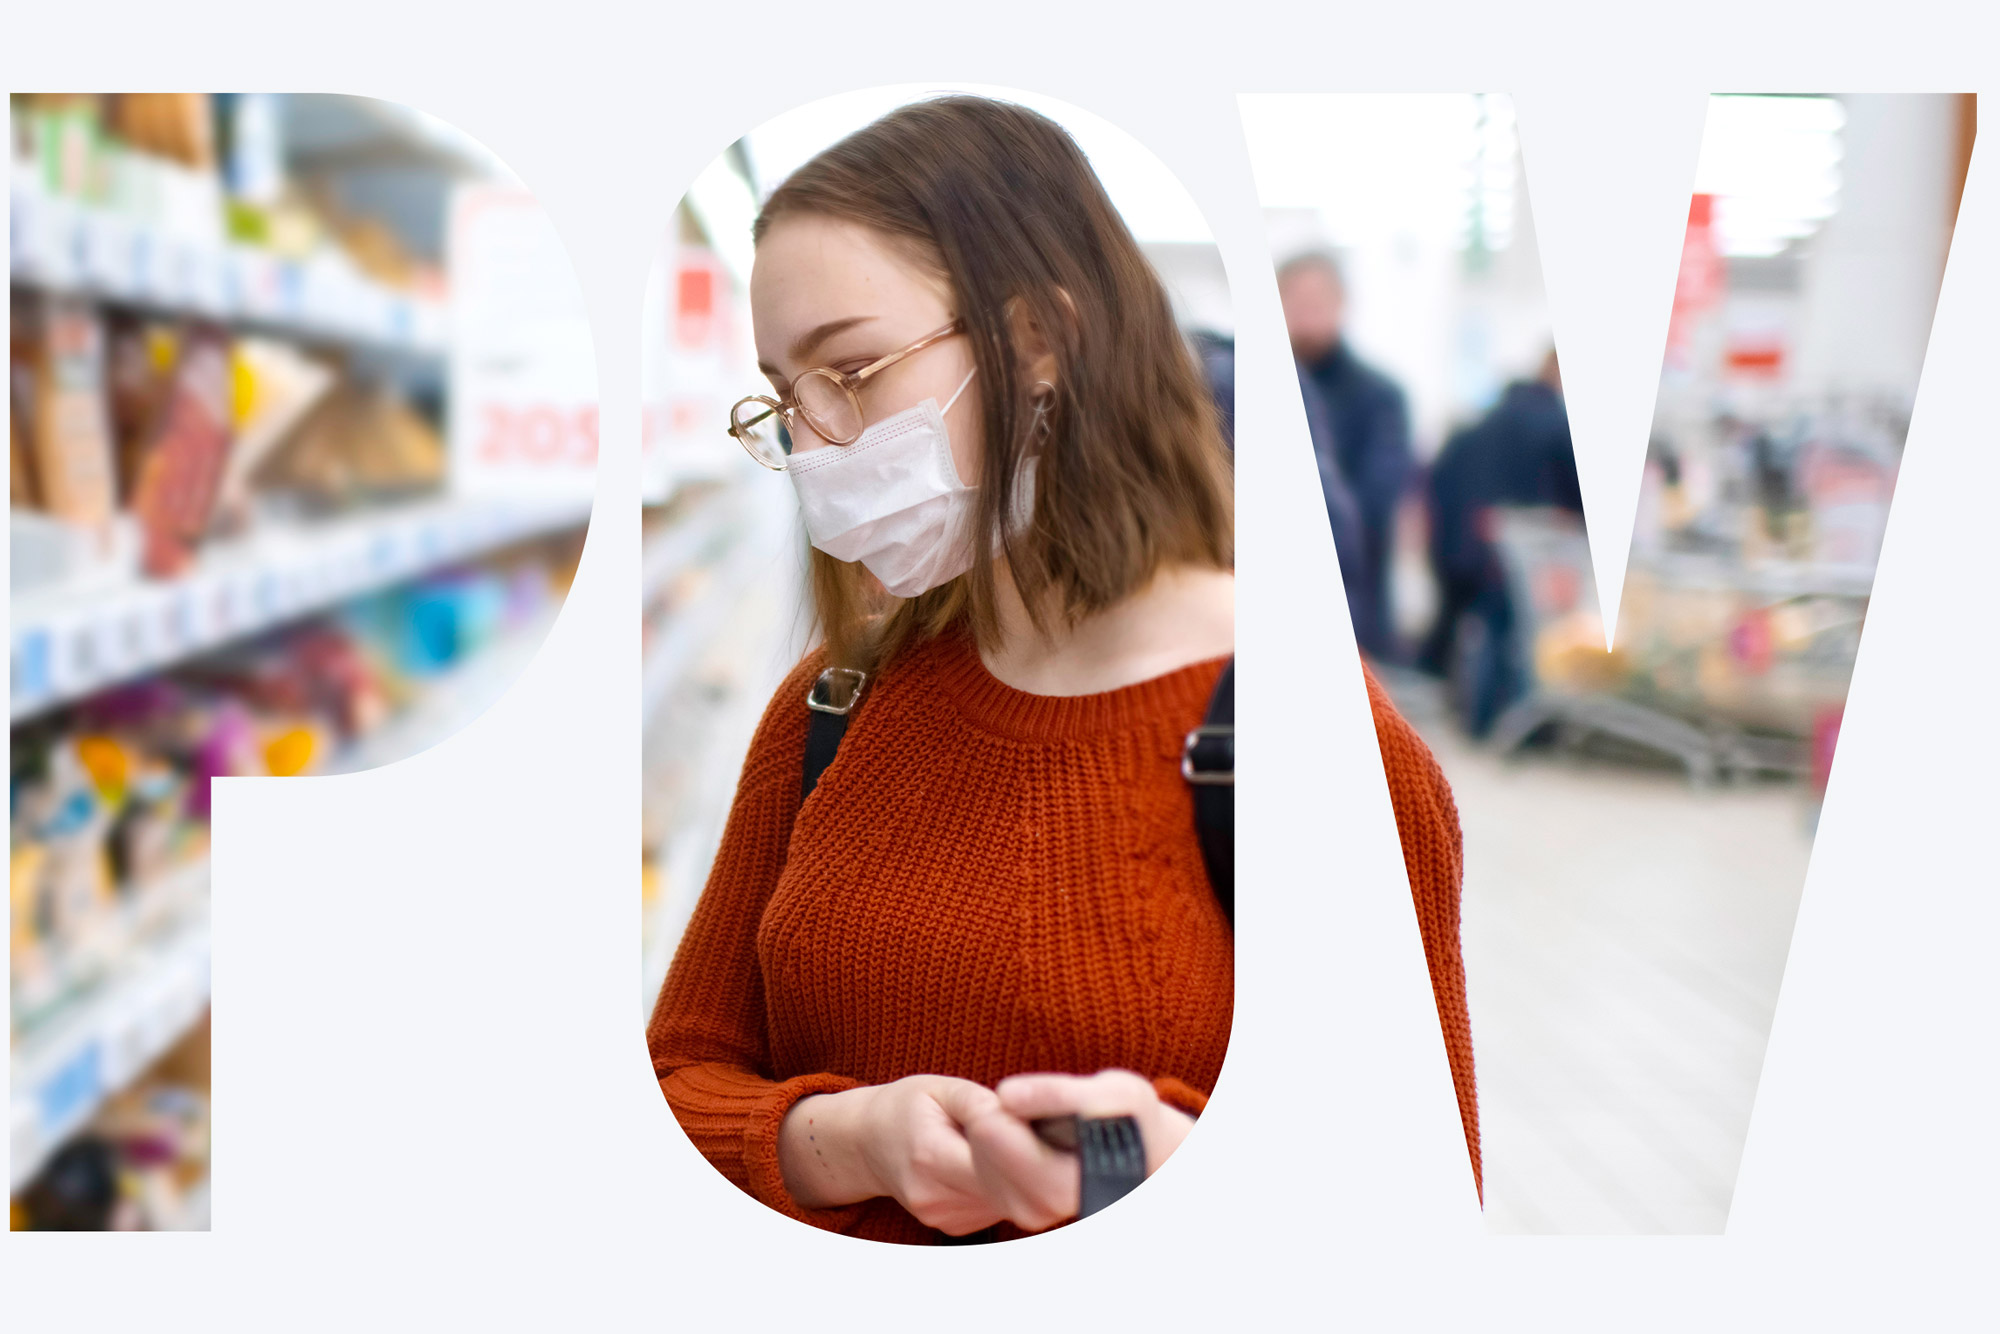 A photo of a woman grocery shopping in a mask. A white overlay reads "POV."